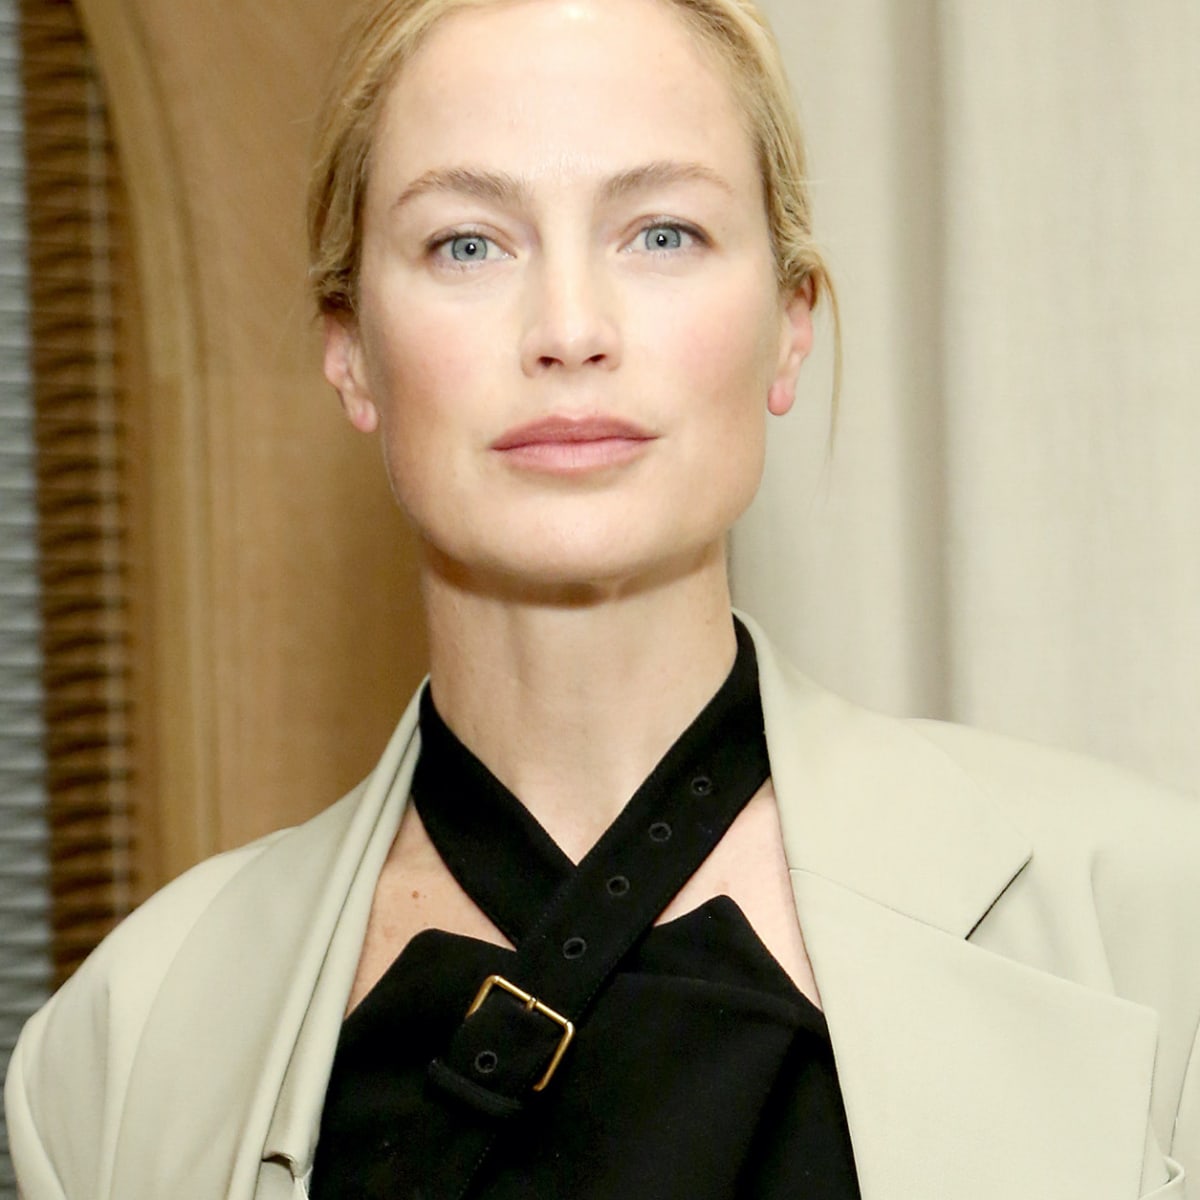 The 49-year old daughter of father (?) and mother(?) Carolyn Murphy in 2024 photo. Carolyn Murphy earned a  million dollar salary - leaving the net worth at 1.9 million in 2024